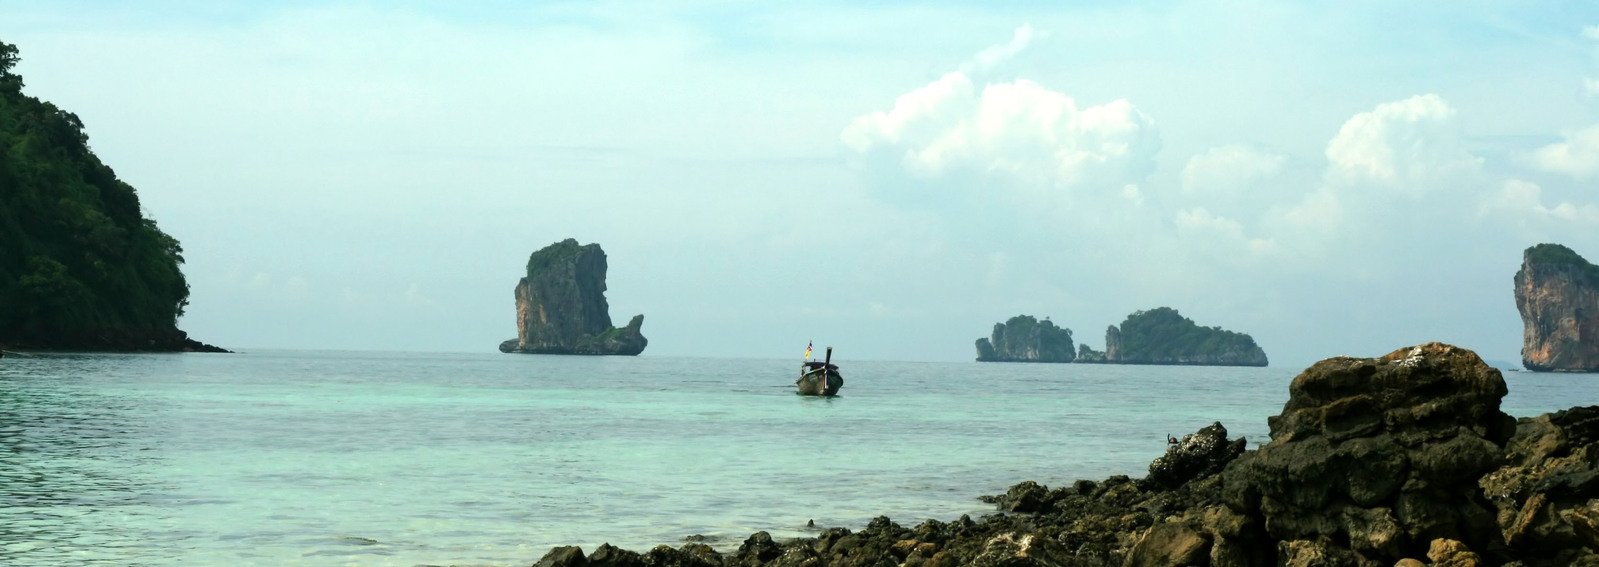 a small boat out on the water near several small rocks